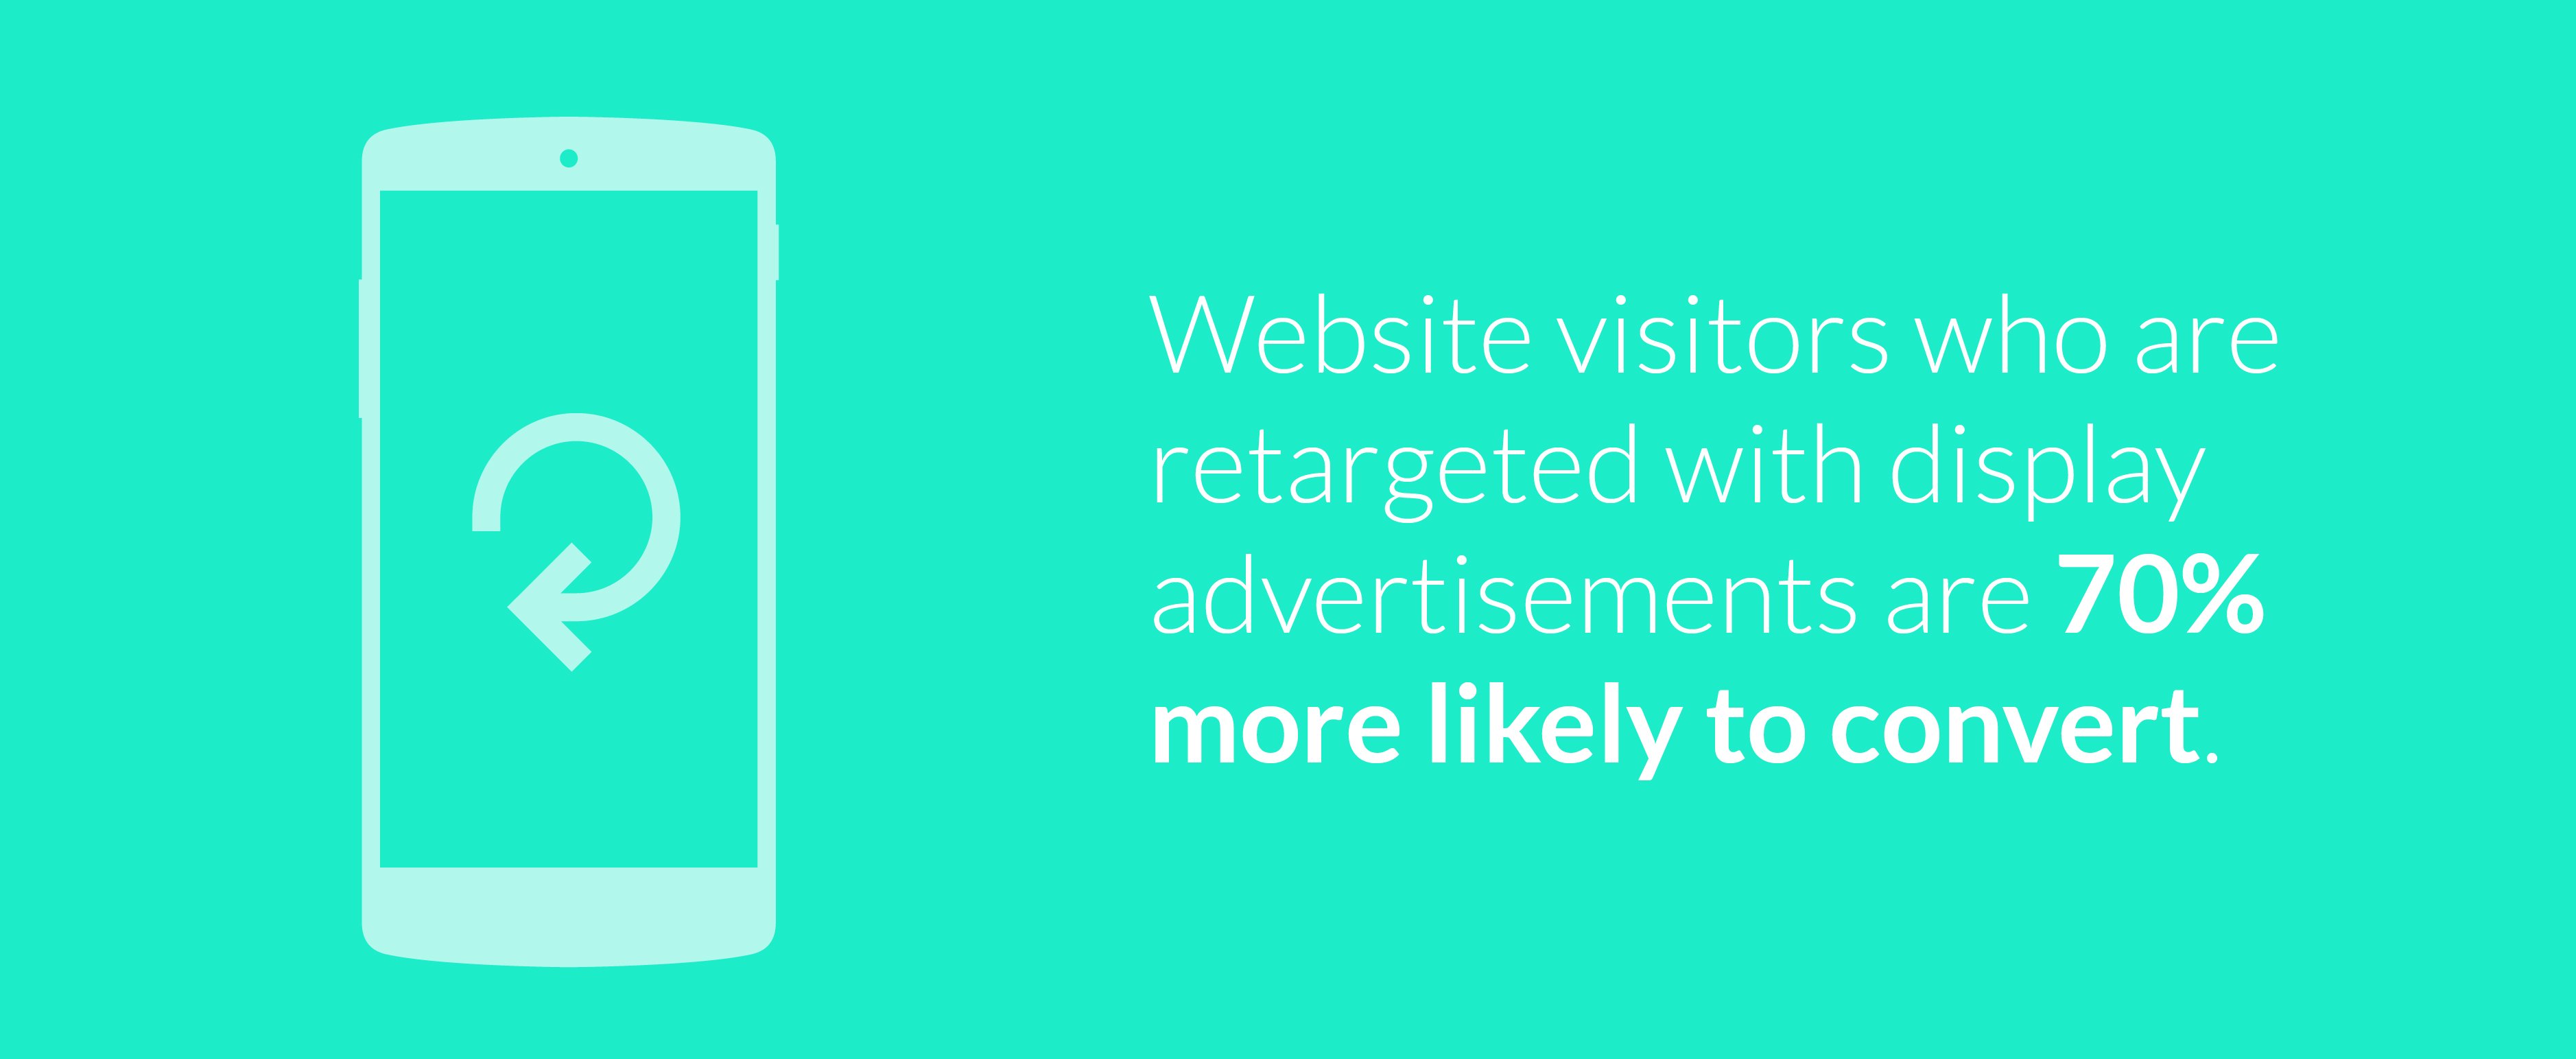 website visitors who are retargeted with display ads are 70 percent more likely to convert